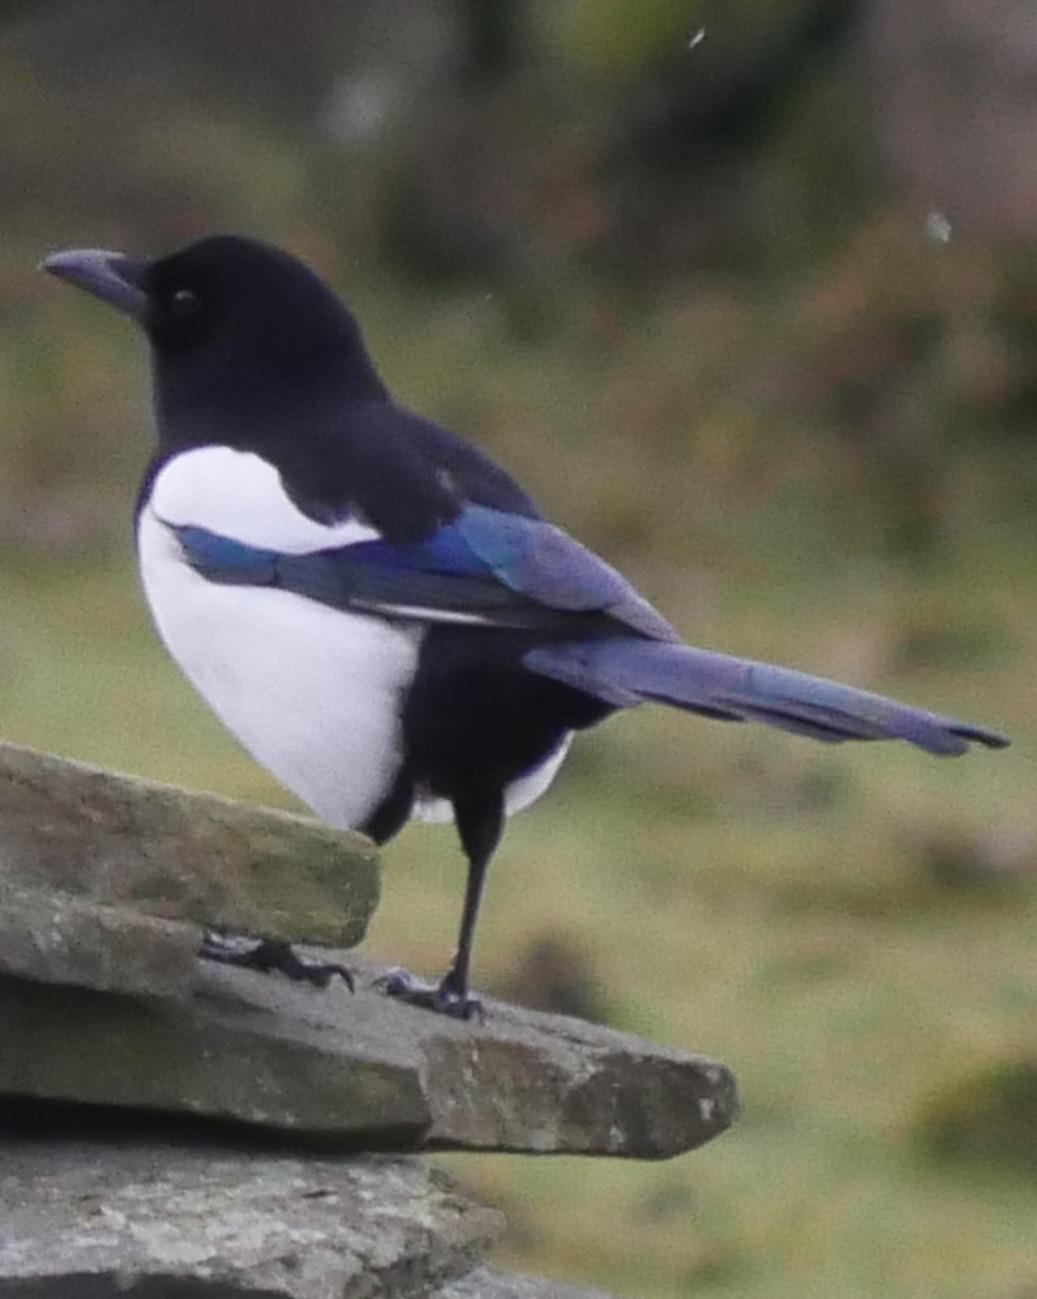 Eurasian Magpie Photo by Peter Lowe